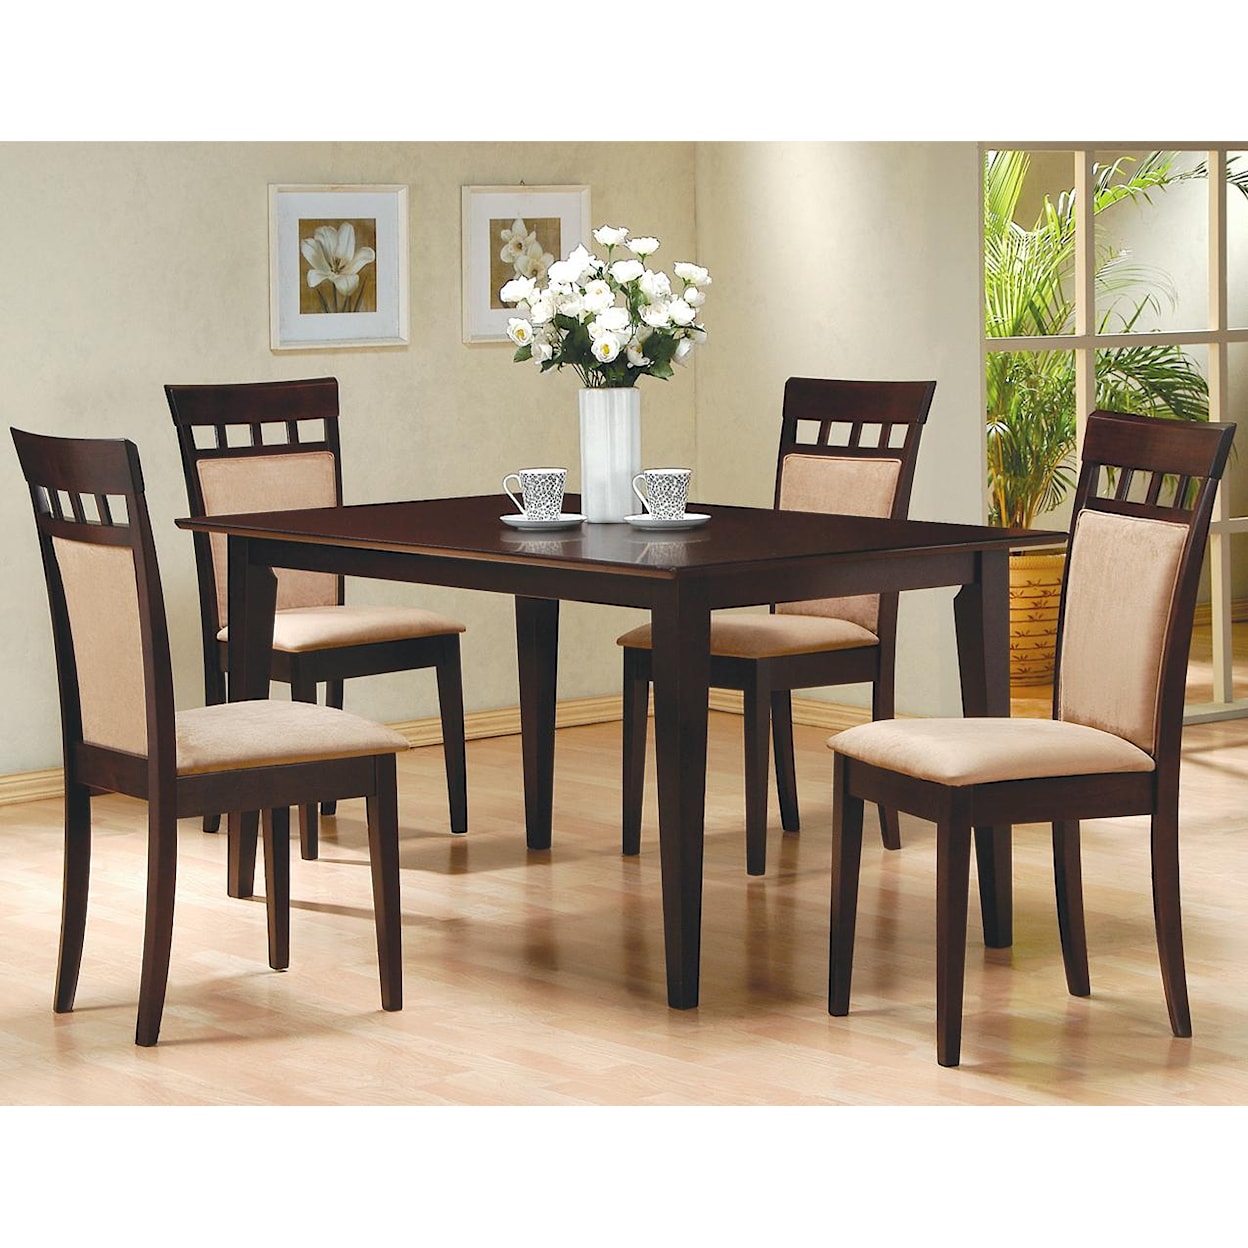 Coaster Mix & Match Dining Table